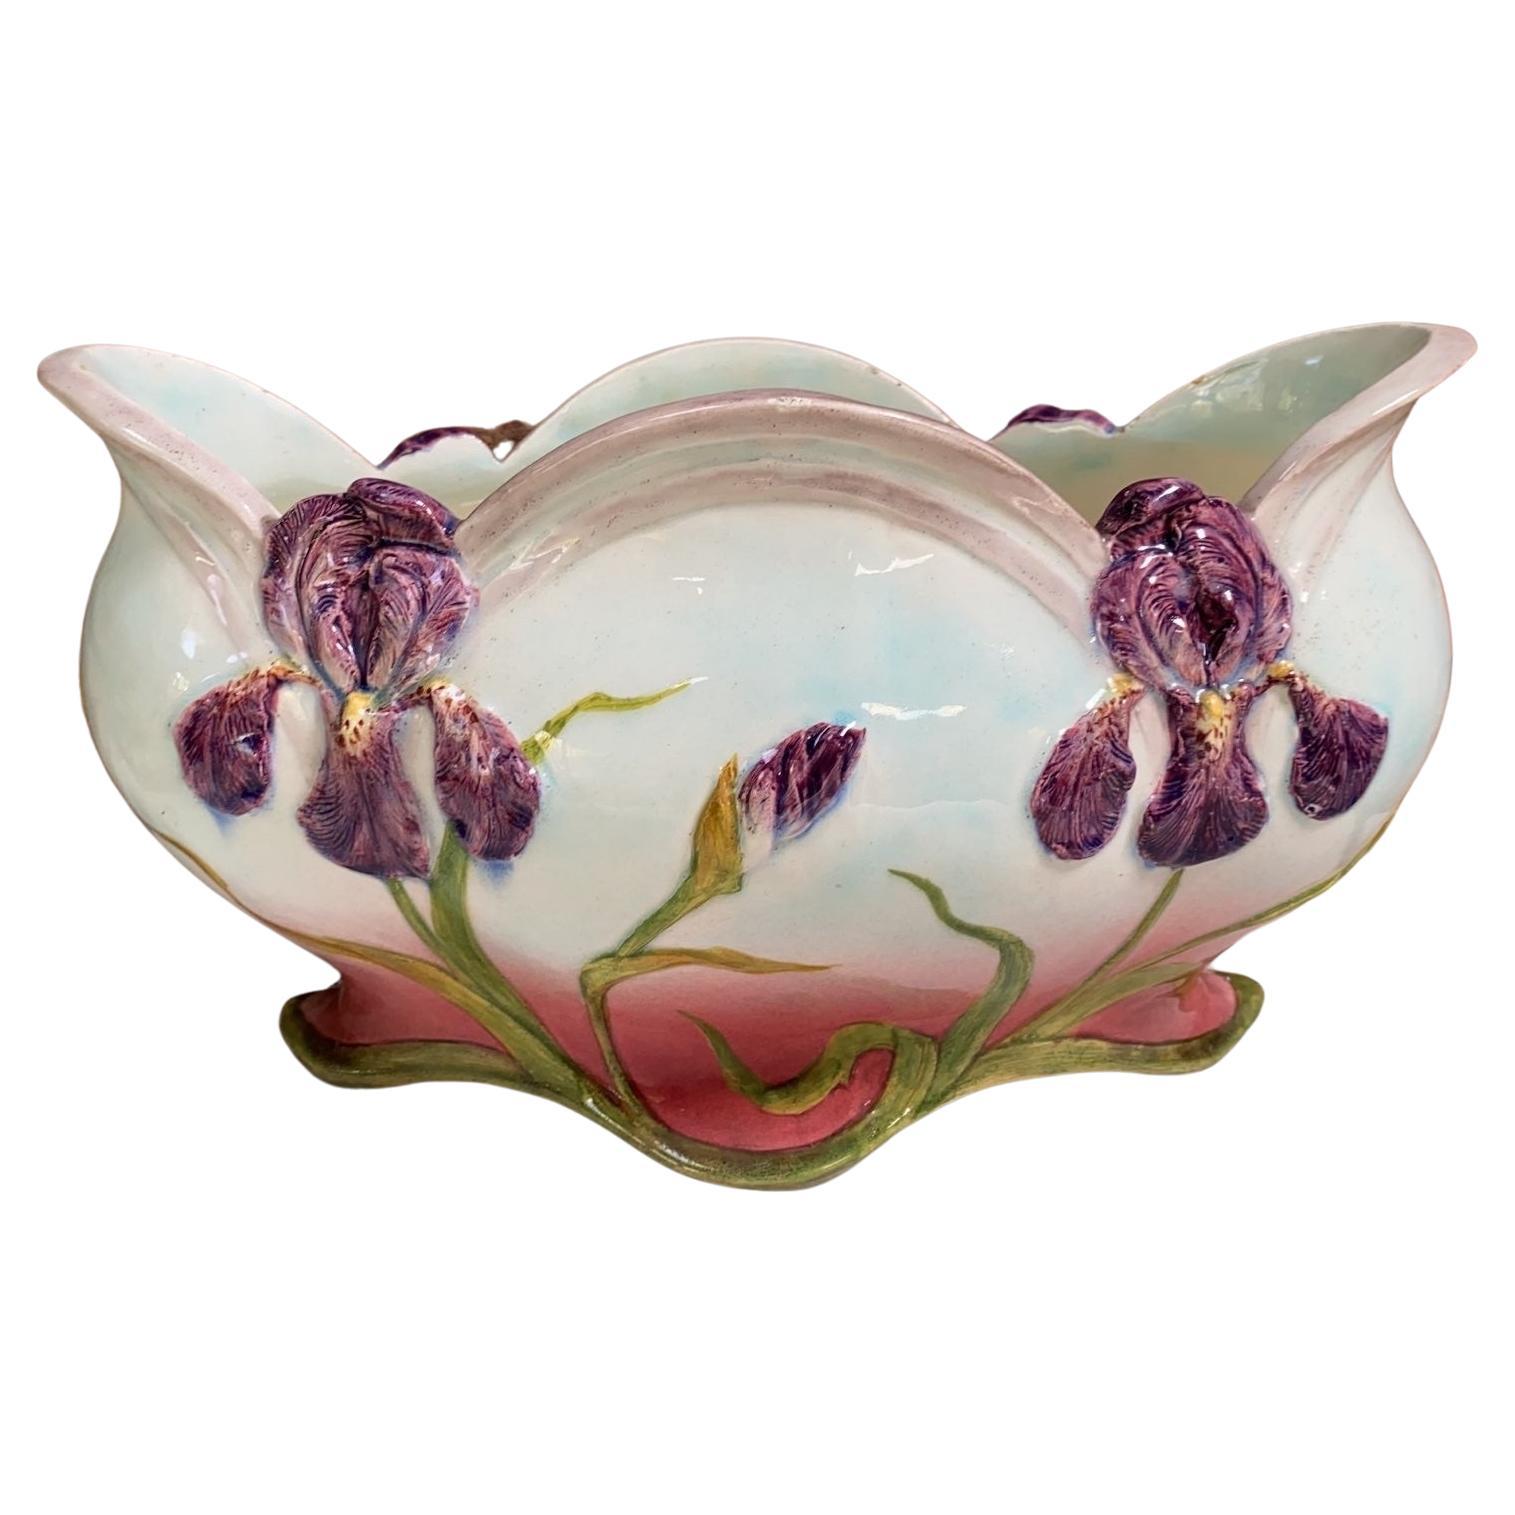 French Majolica oval jardiniere attributed to Delphin Massier, circa 1890.
The Massier family are known for the quality of their unique enamels and paintings. They produced an incredible whole range of flowers like iris, roses, daisies, wild roses,